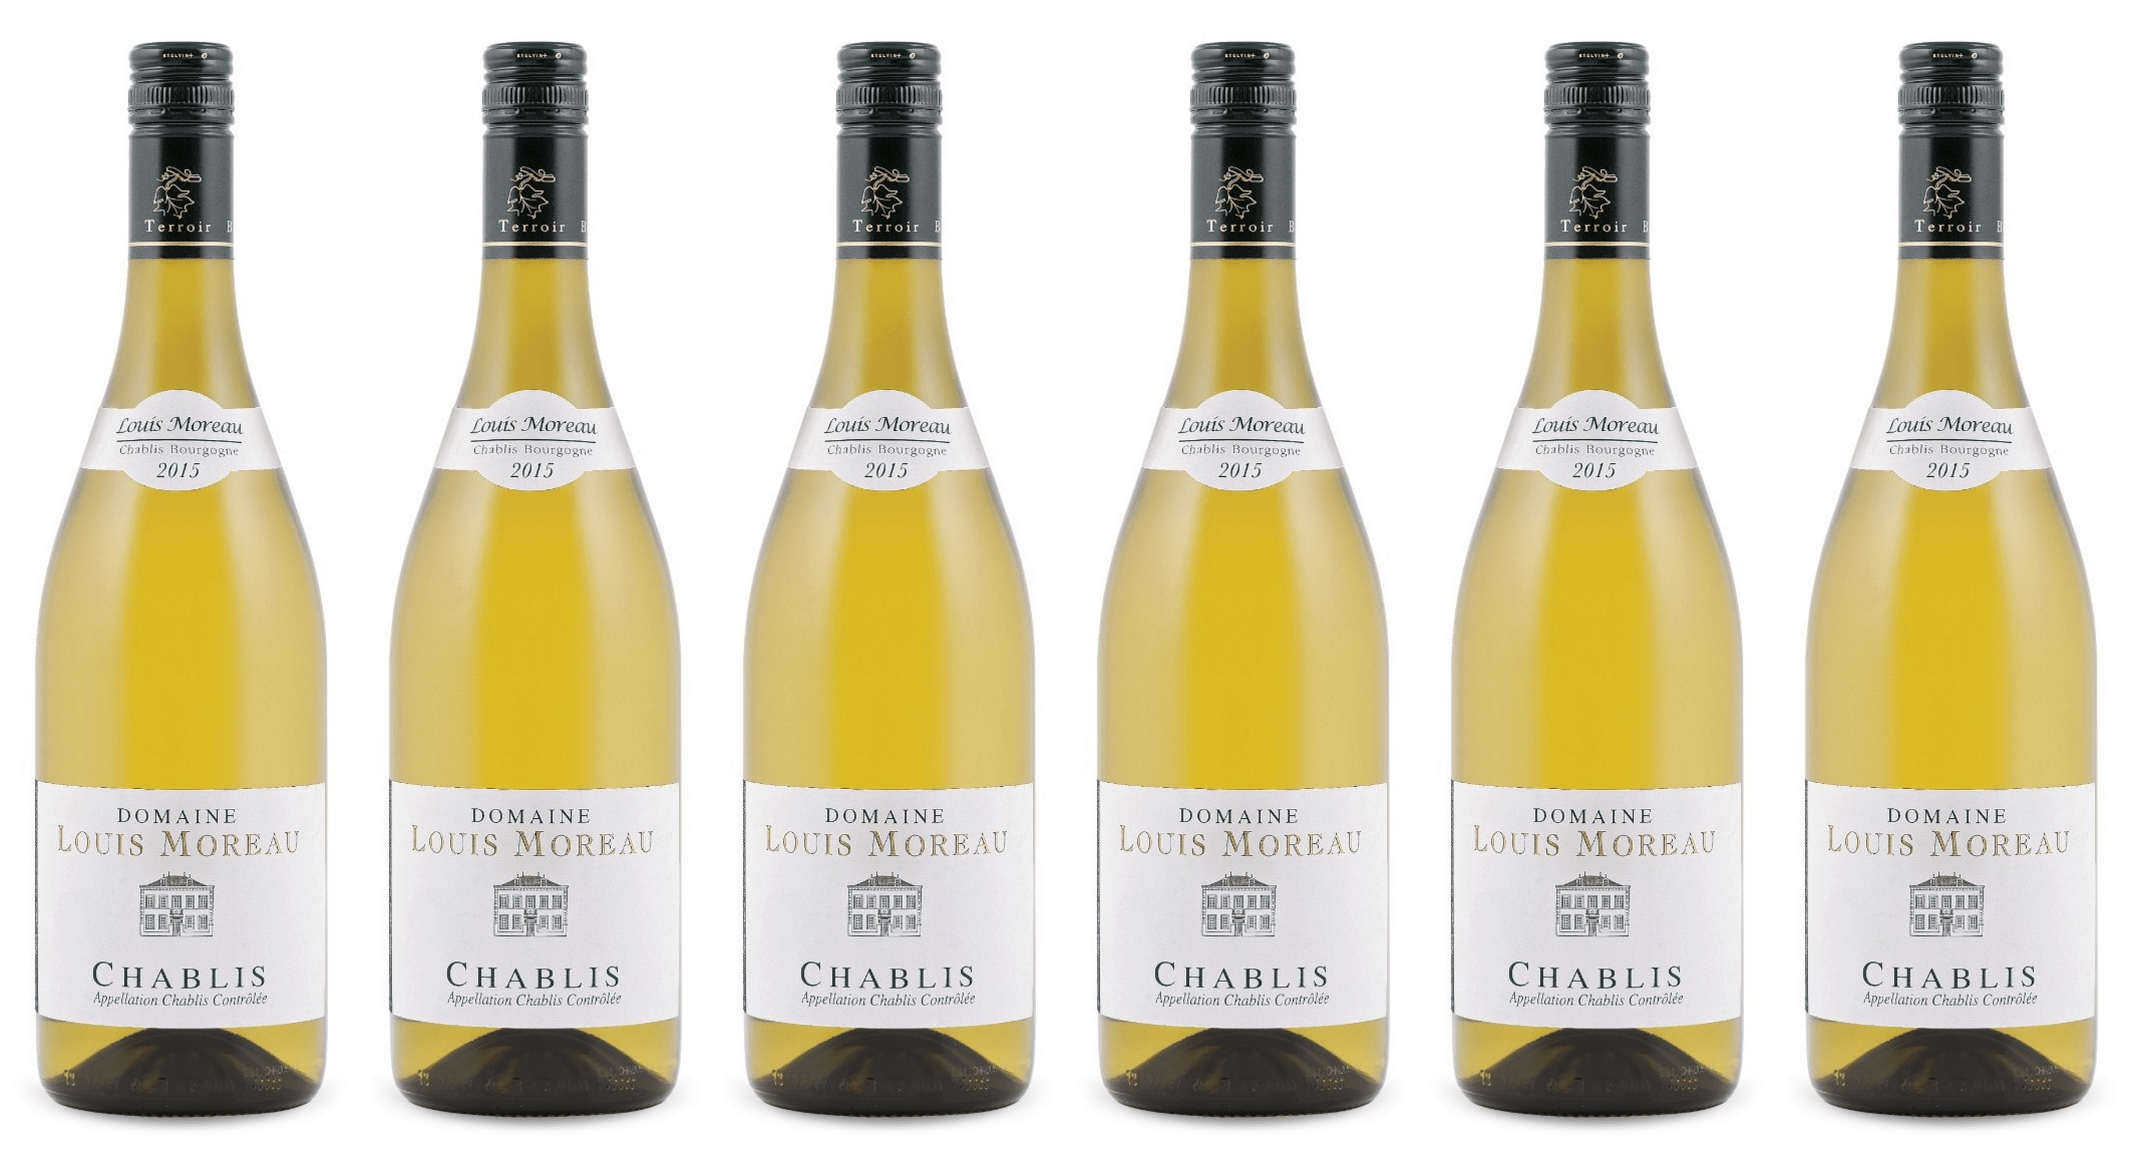 Try This : A Smashing Chablis For The Money